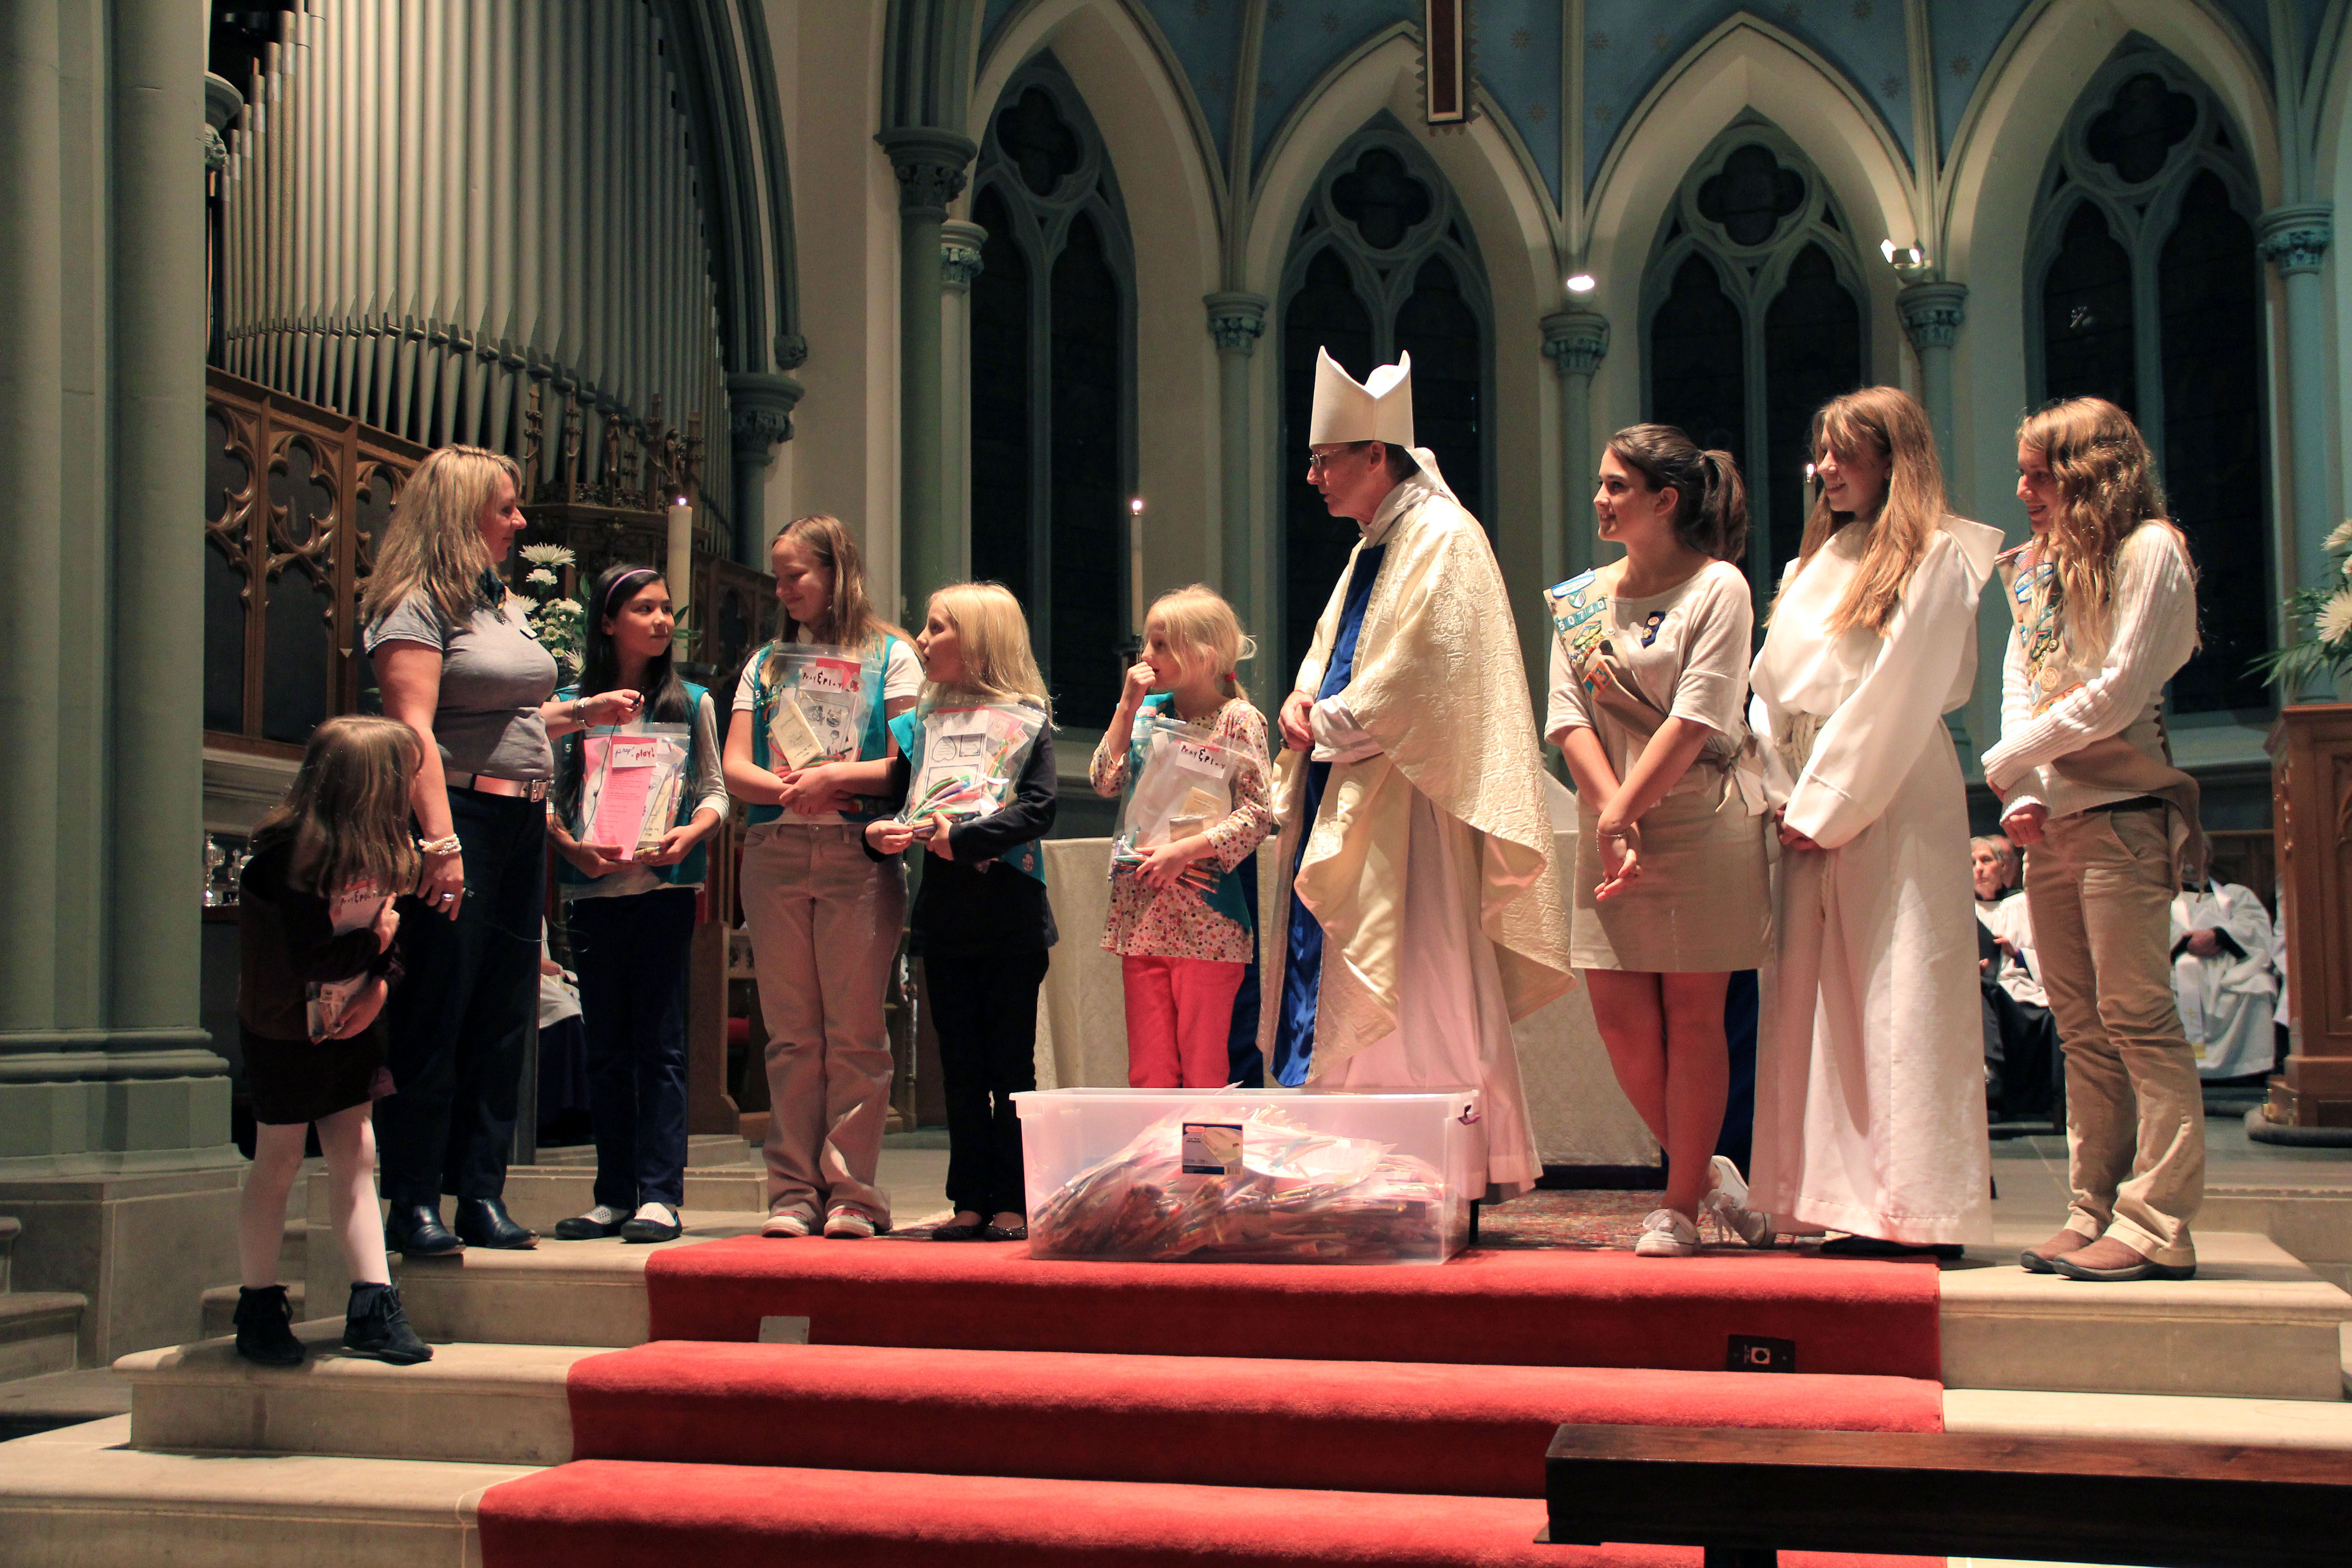 Girl Scouts from Troop 57003 and Troop 50740 present The Rt. Rev. Dorsey McConnell, Bishop of the Episcopal Diocese of Pittsburgh with 100 “Pray & Play” bags and explain their usage.